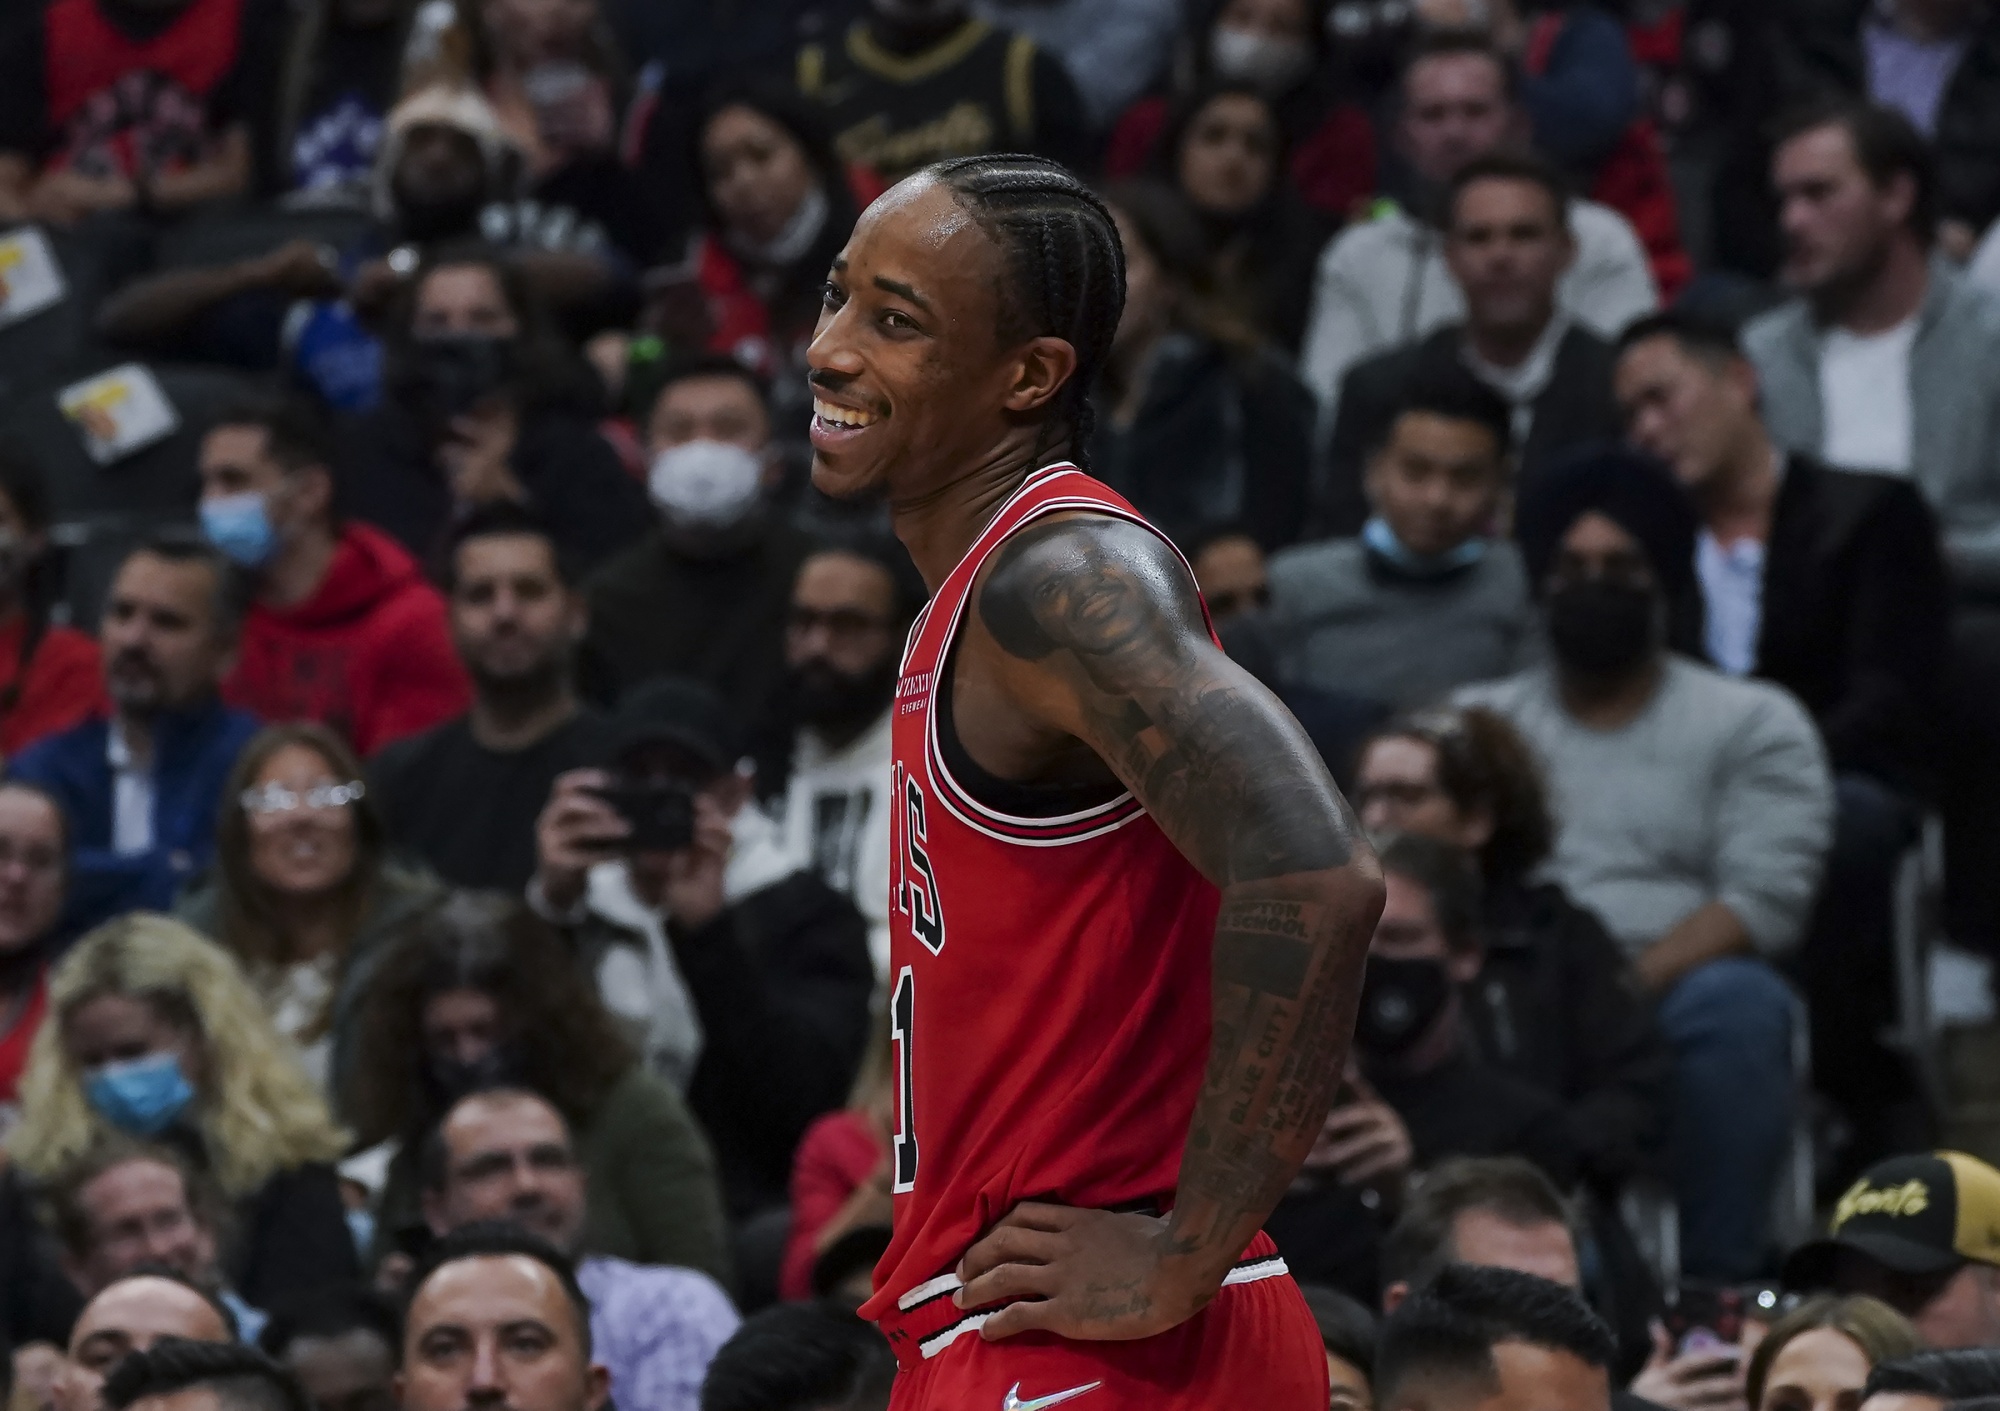 Chicago Bulls are leading the Eastern Conference behind DeMar